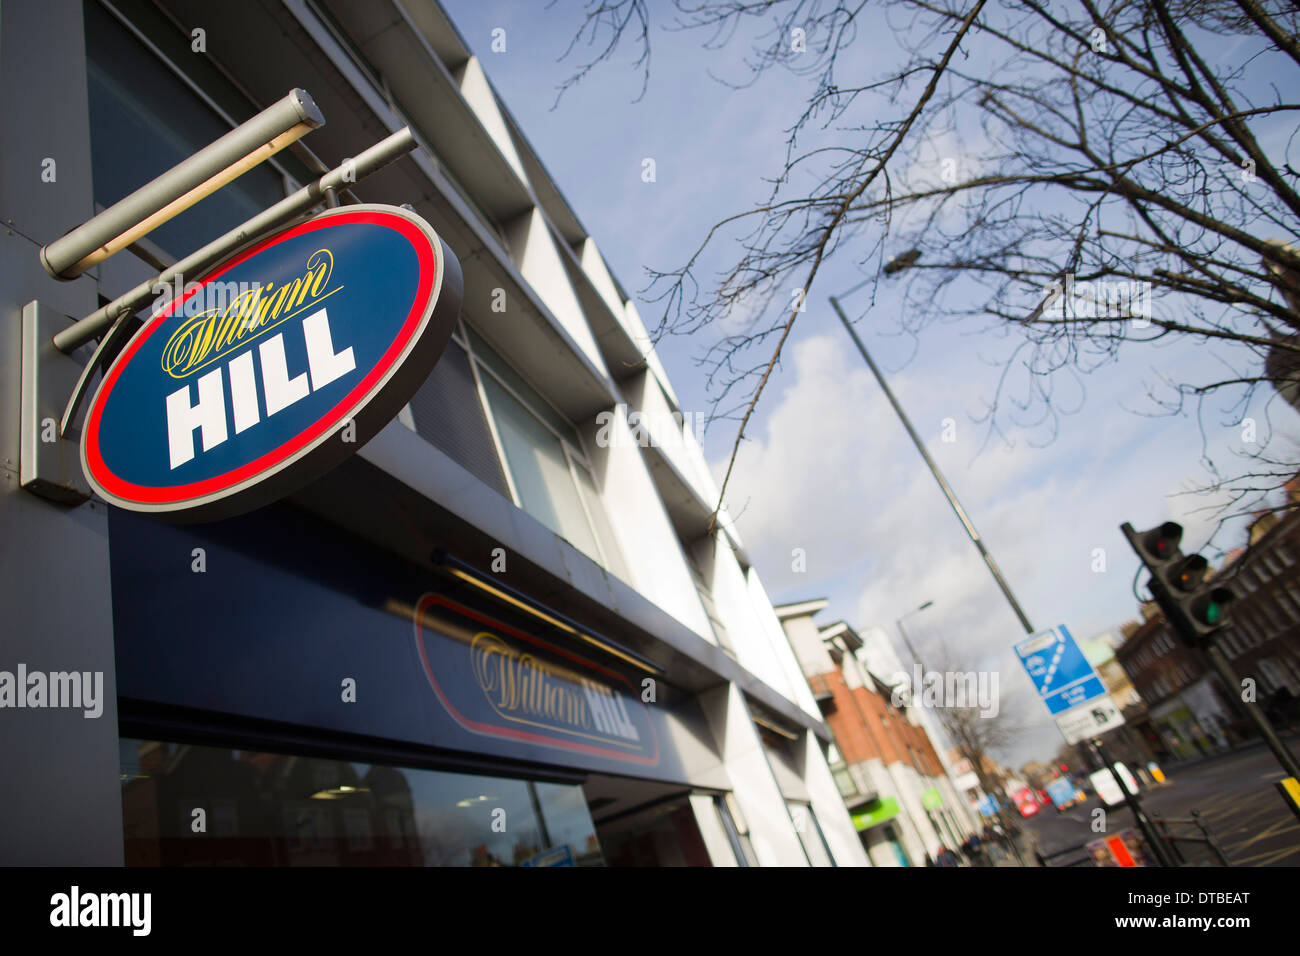 United Kingdom, London : A William Hill Bookmakers' is pictured in Hackney, London.  Stock Photo